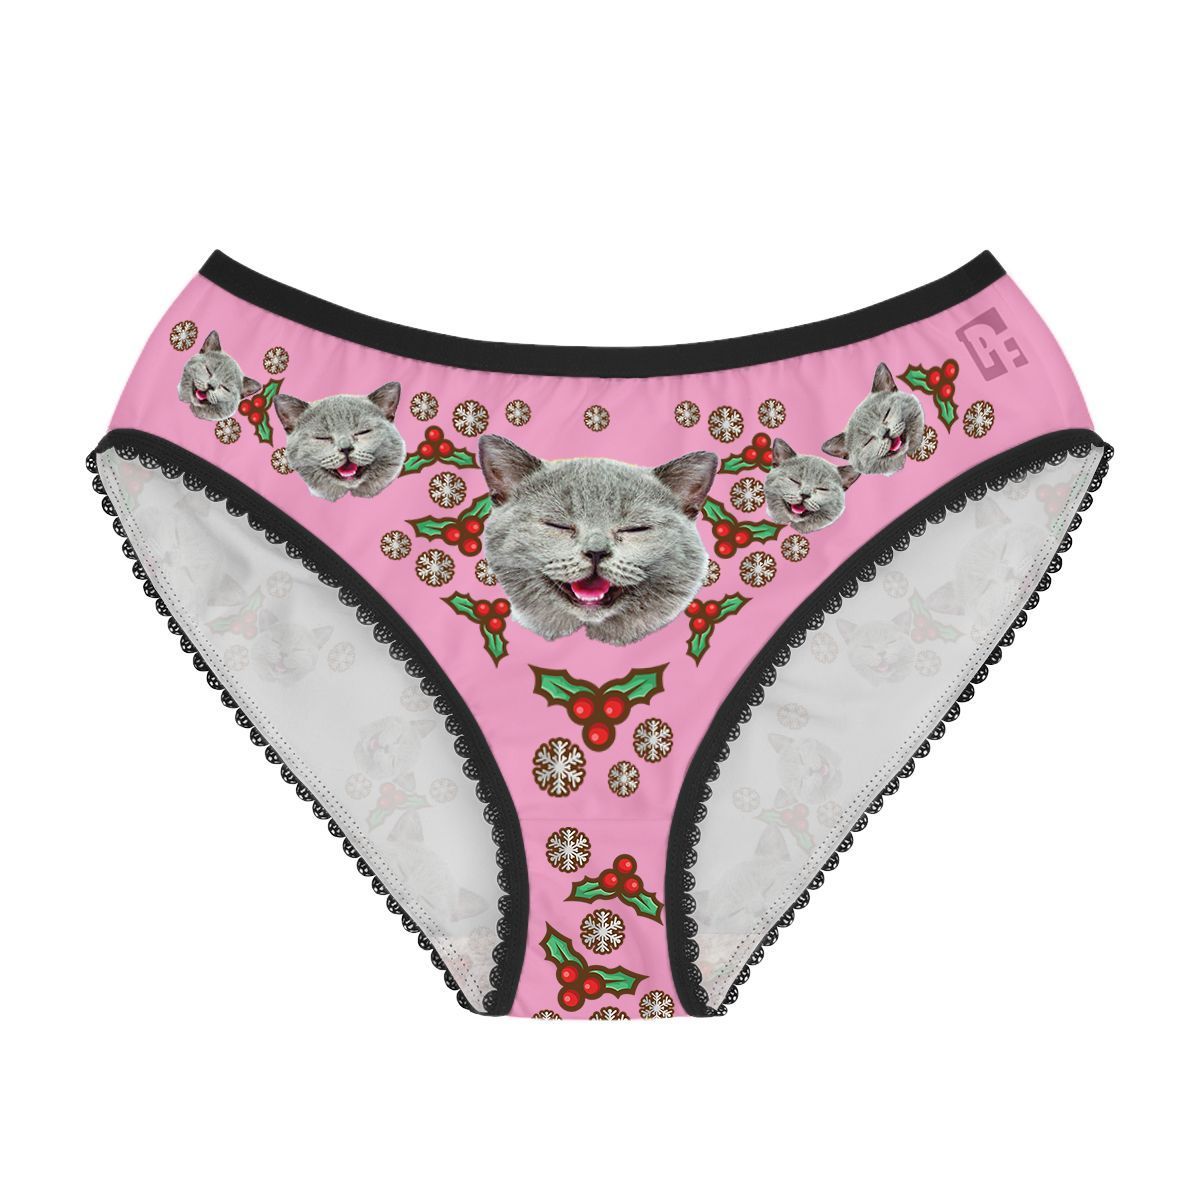 Pink Mistletoe women's underwear briefs personalized with photo printed on them